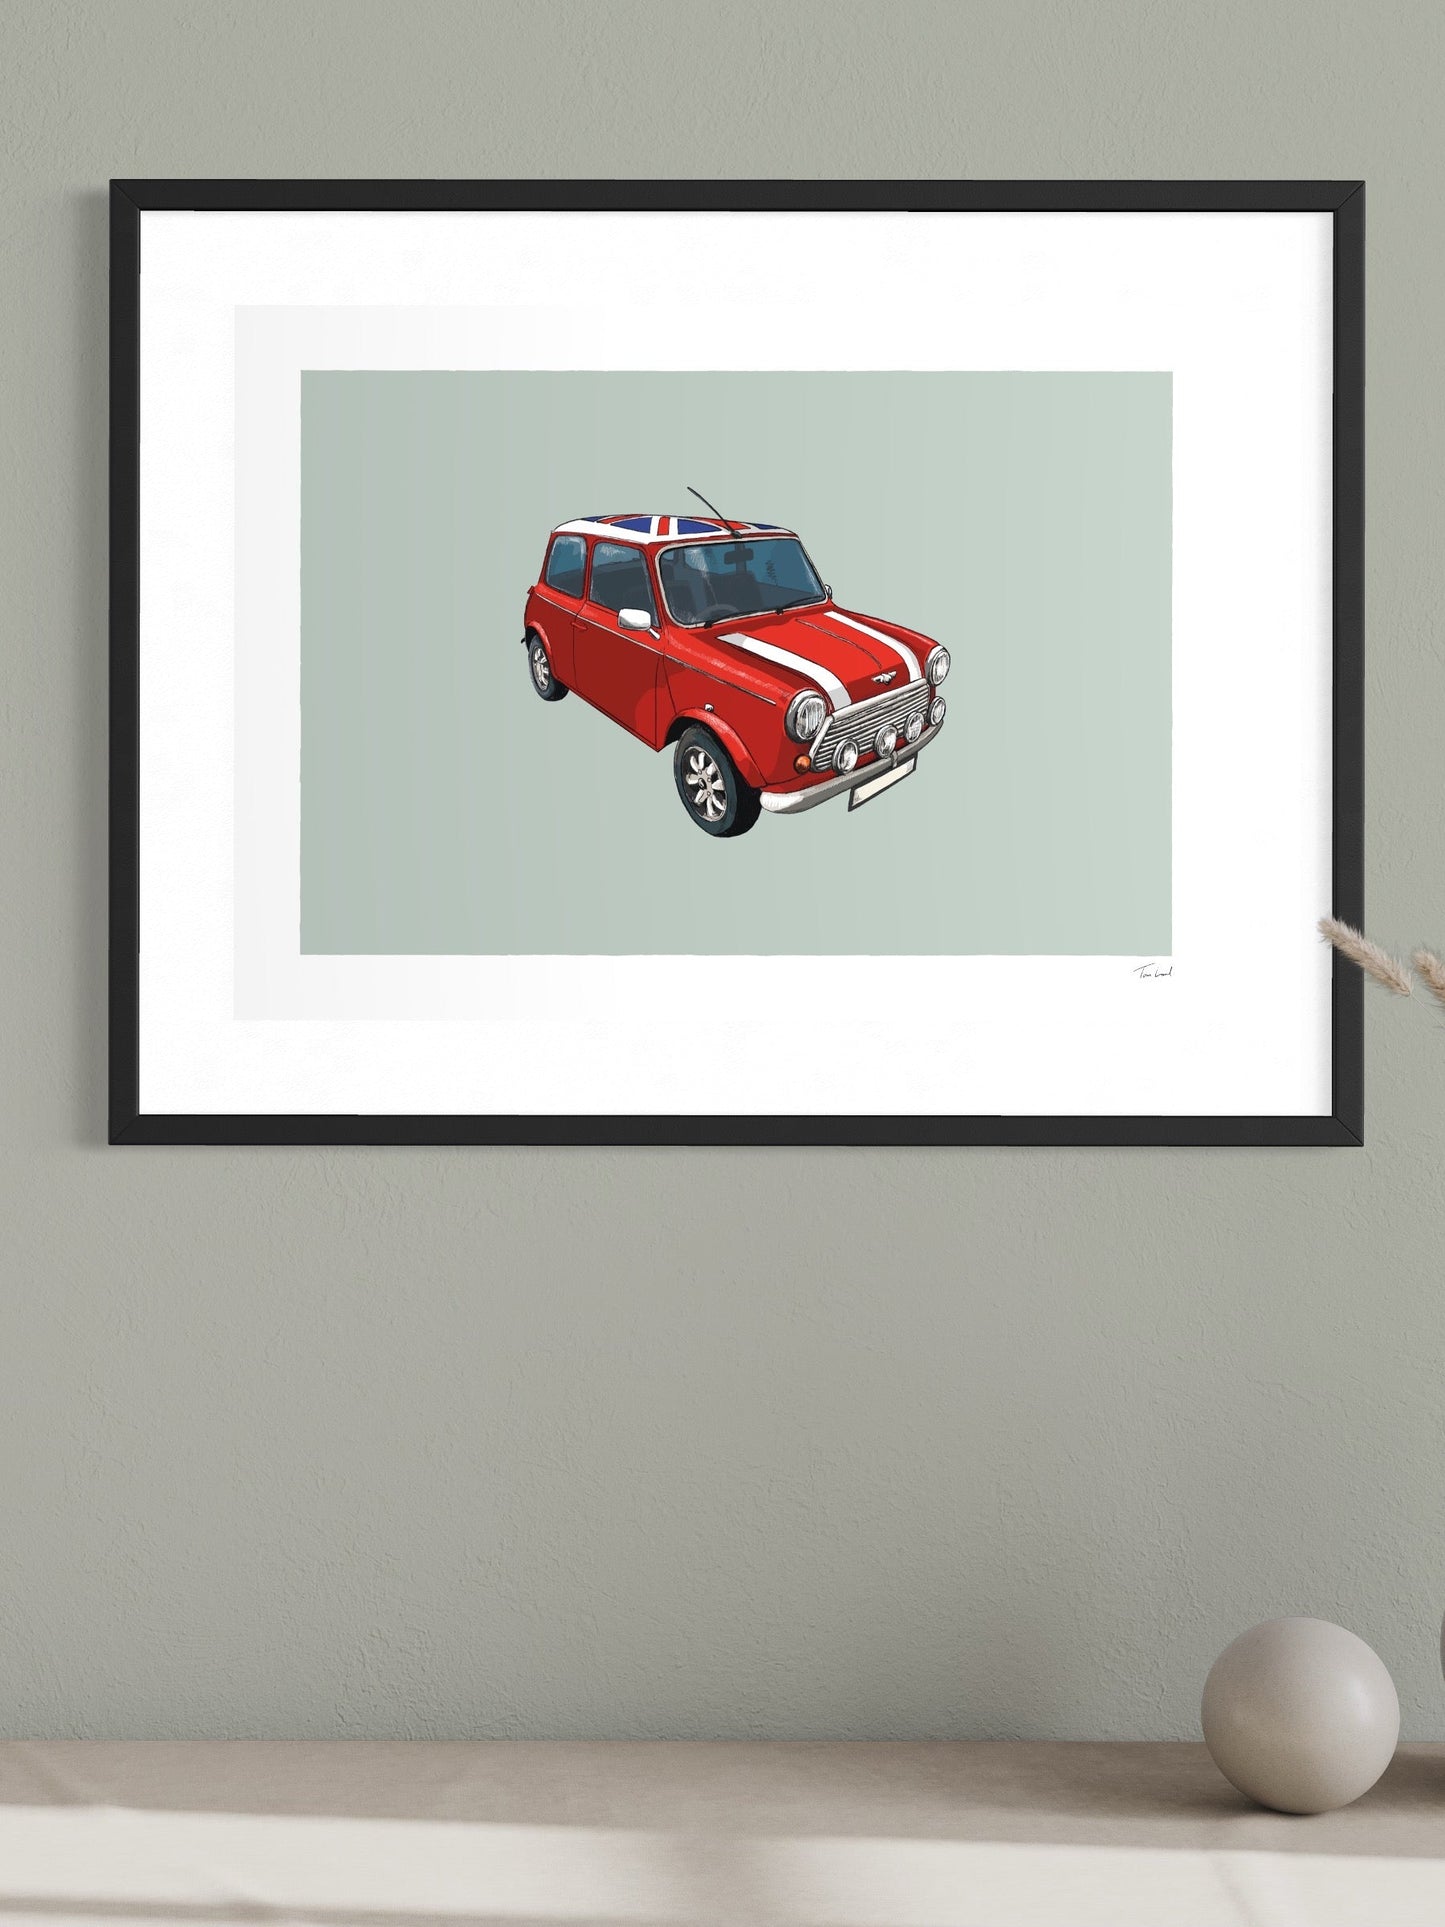 This image shows a giclee wall art print by Tom Laird Illustration of the British classic car, the Mini, framed in a beautiful living room with tasteful modern home decor. This art print of a red example with a Union Jack roof is available from Tom Laird Illustration in a variety of sizes.